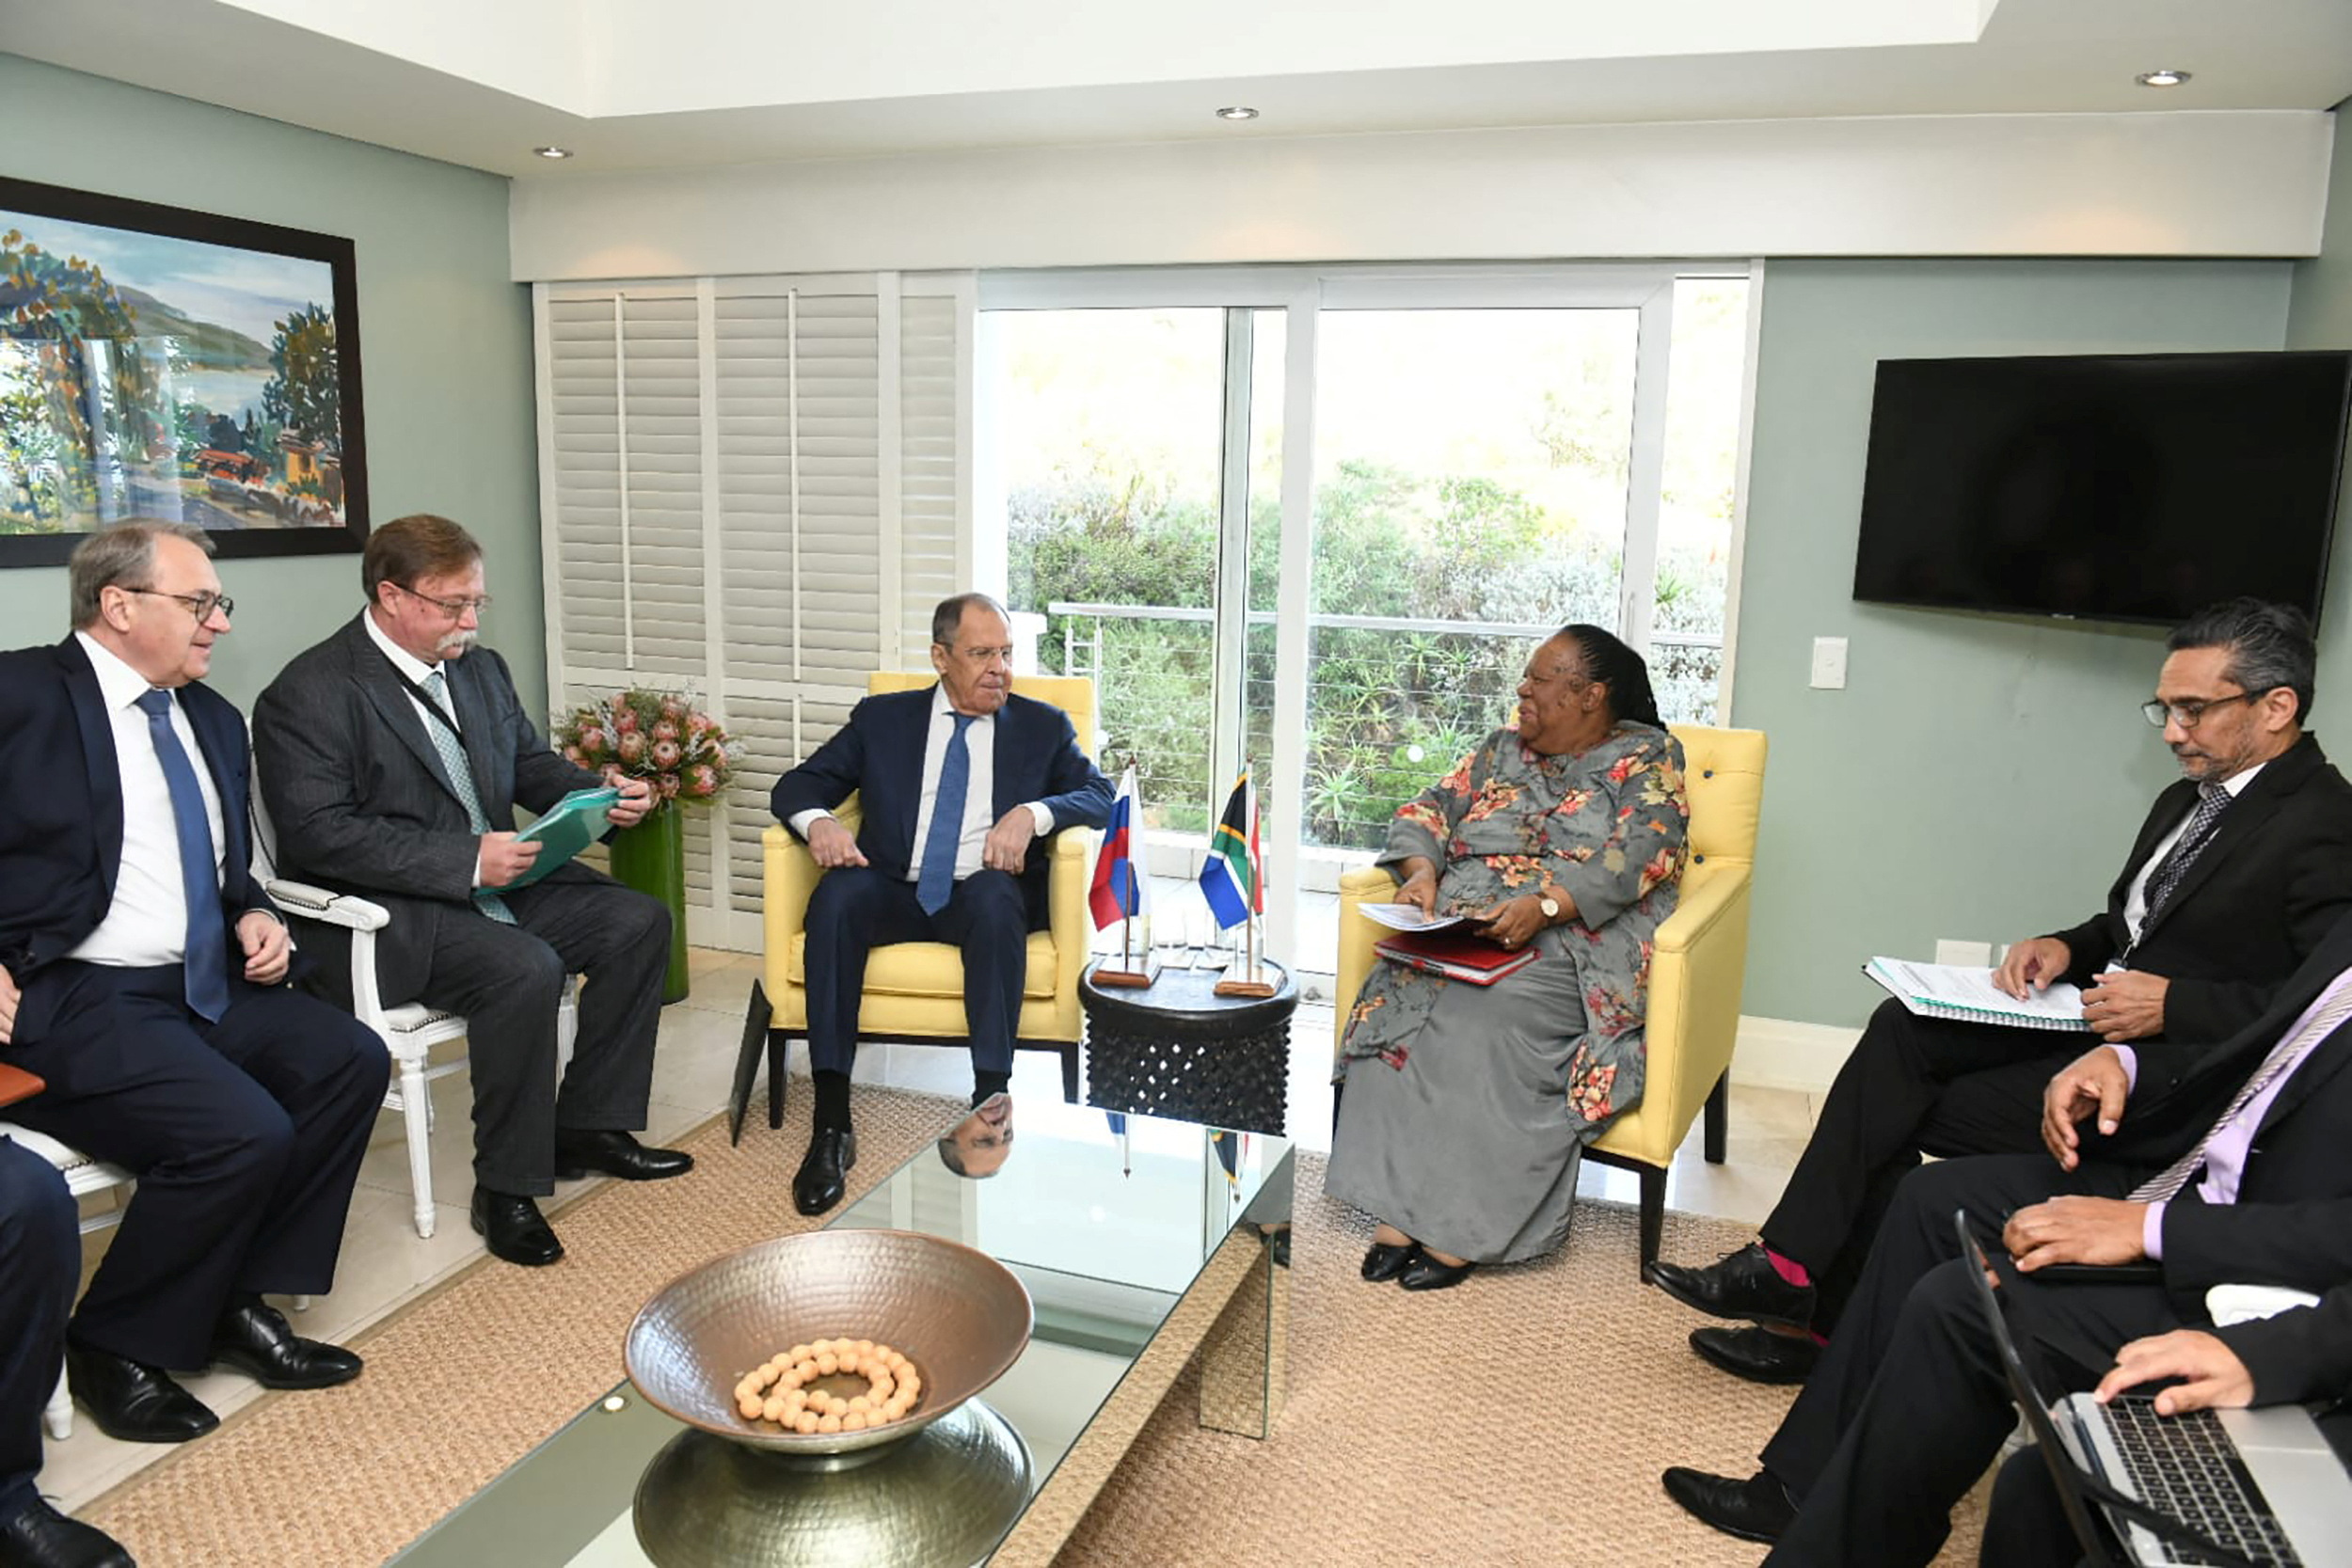 Russia's Lavrov meets South Africa's Pandor in Cape Town